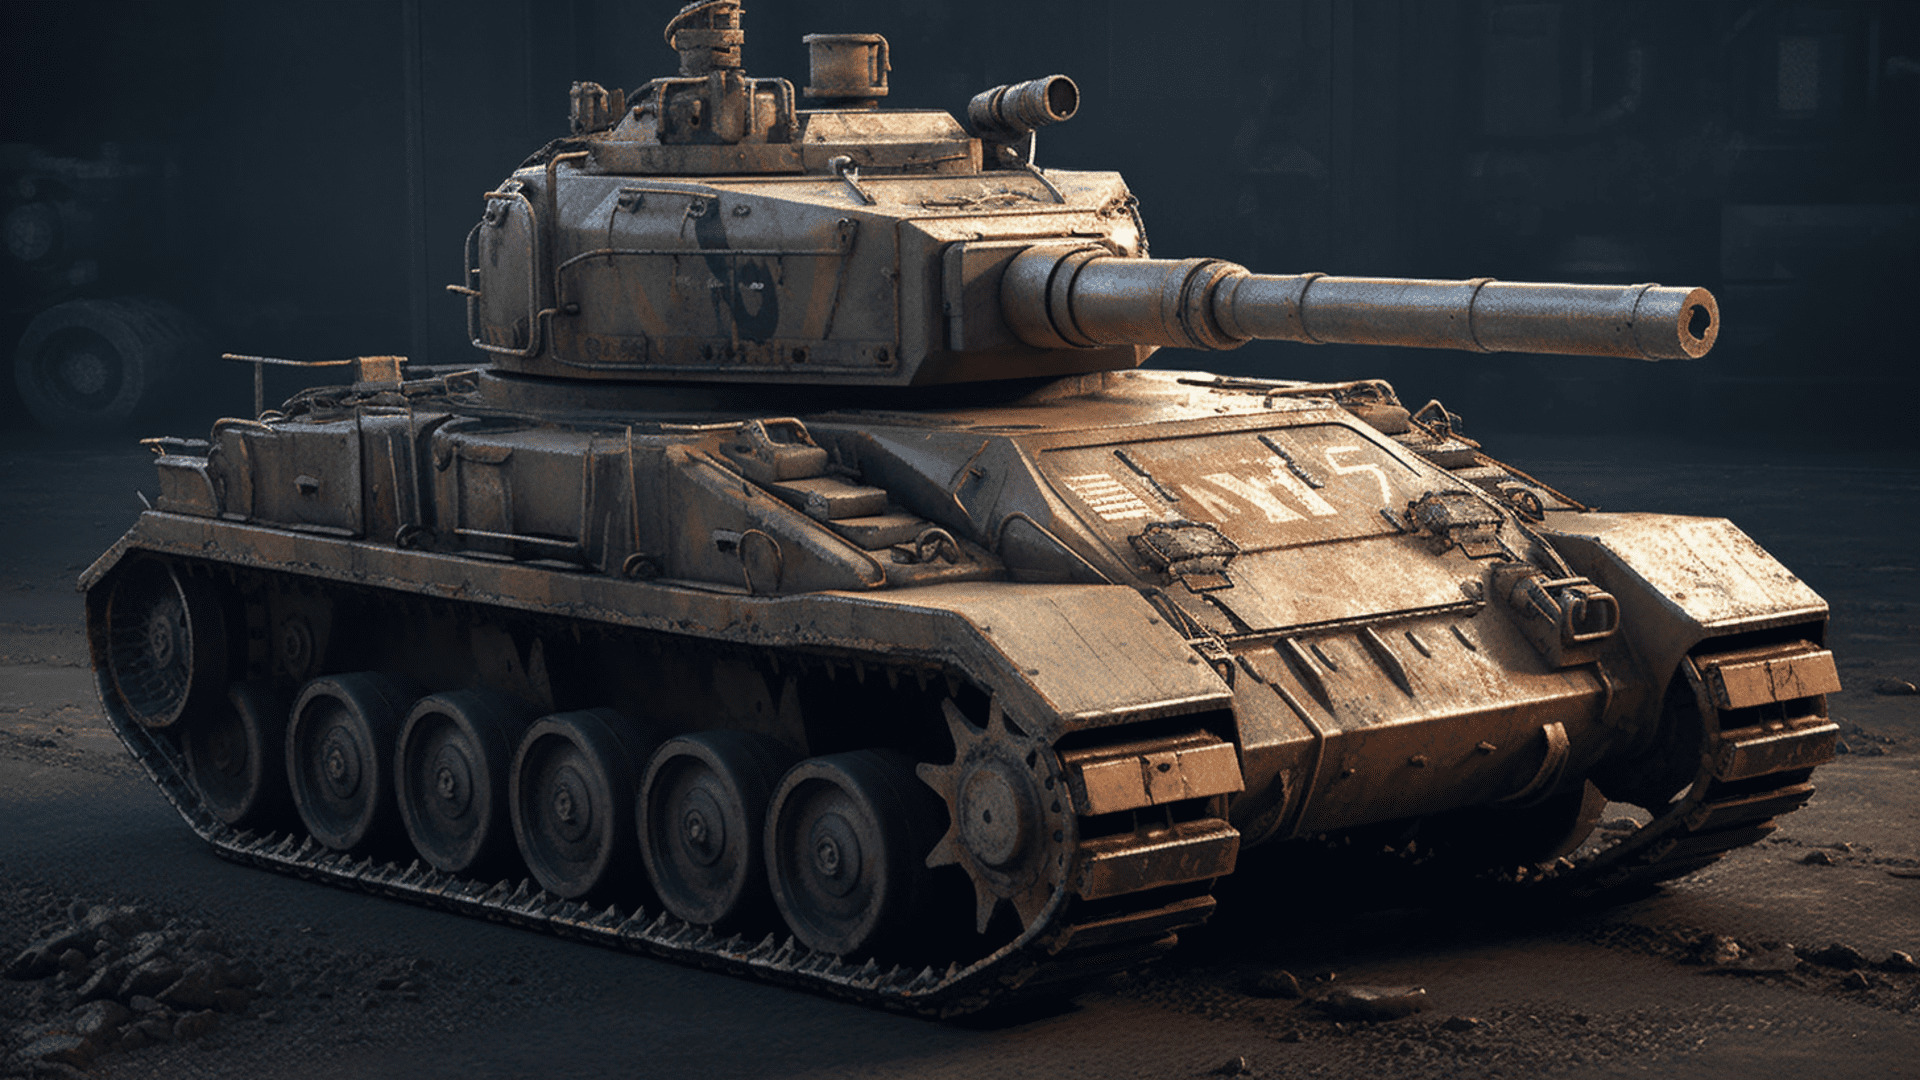 The best tank games for PC